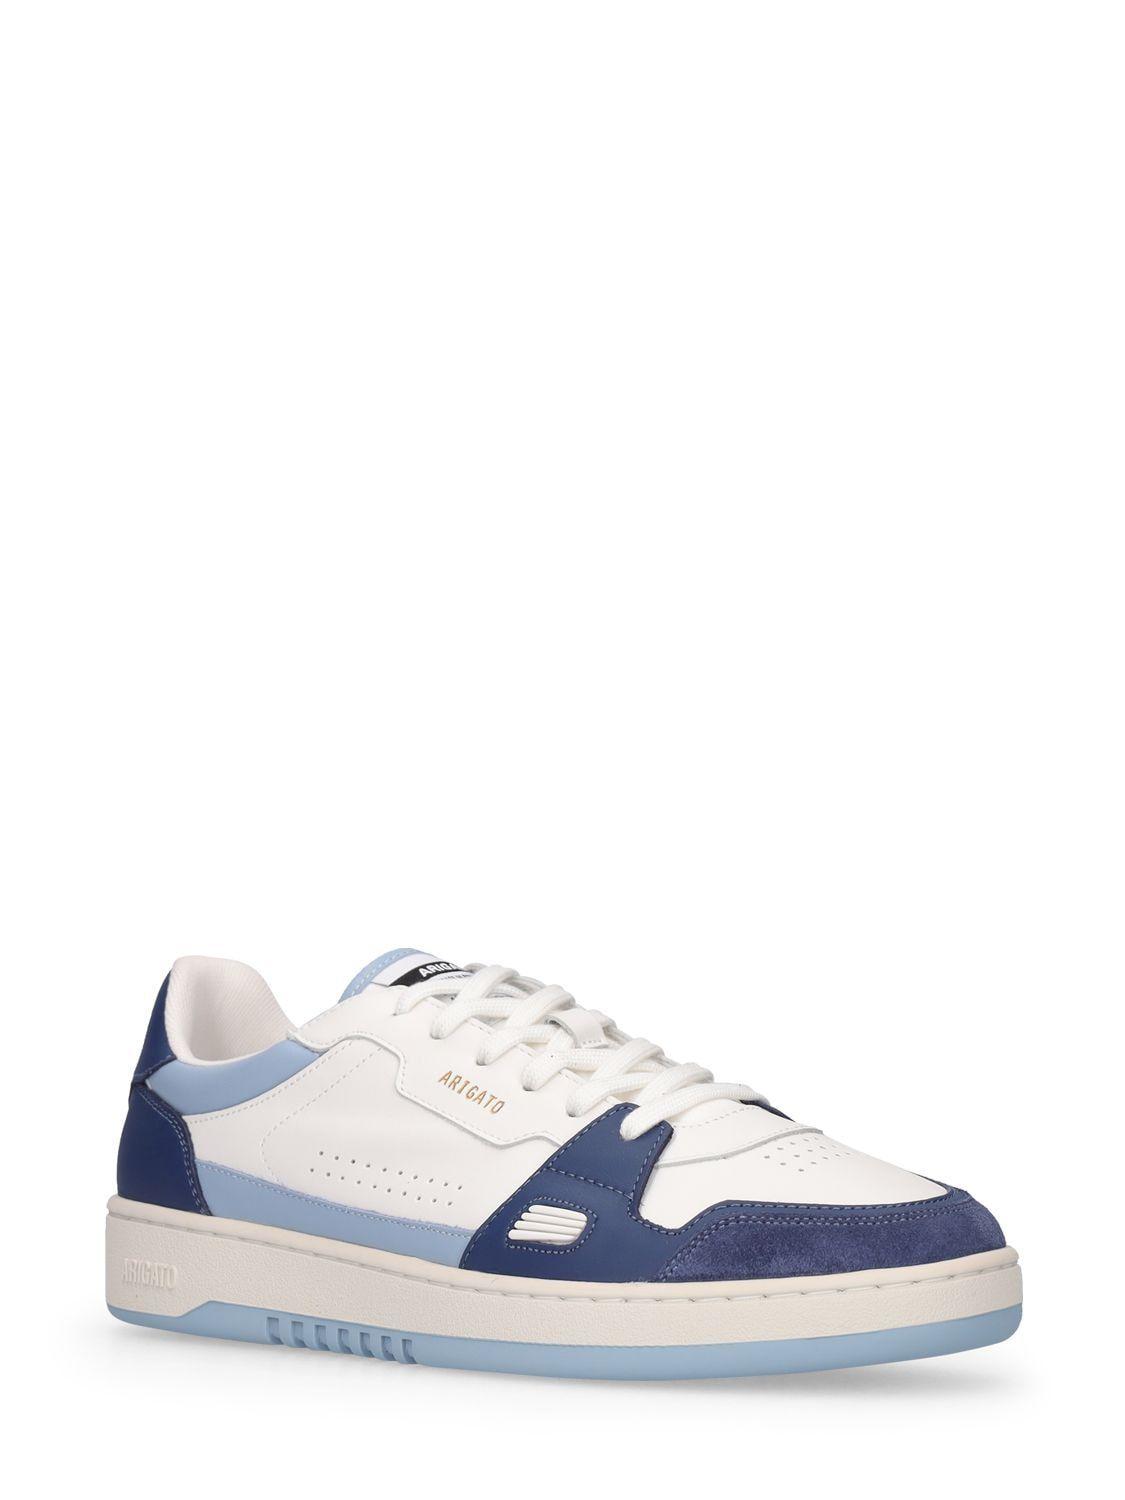 Axel Arigato Dice Lo Leather Sneakers in Blue for Men | Lyst